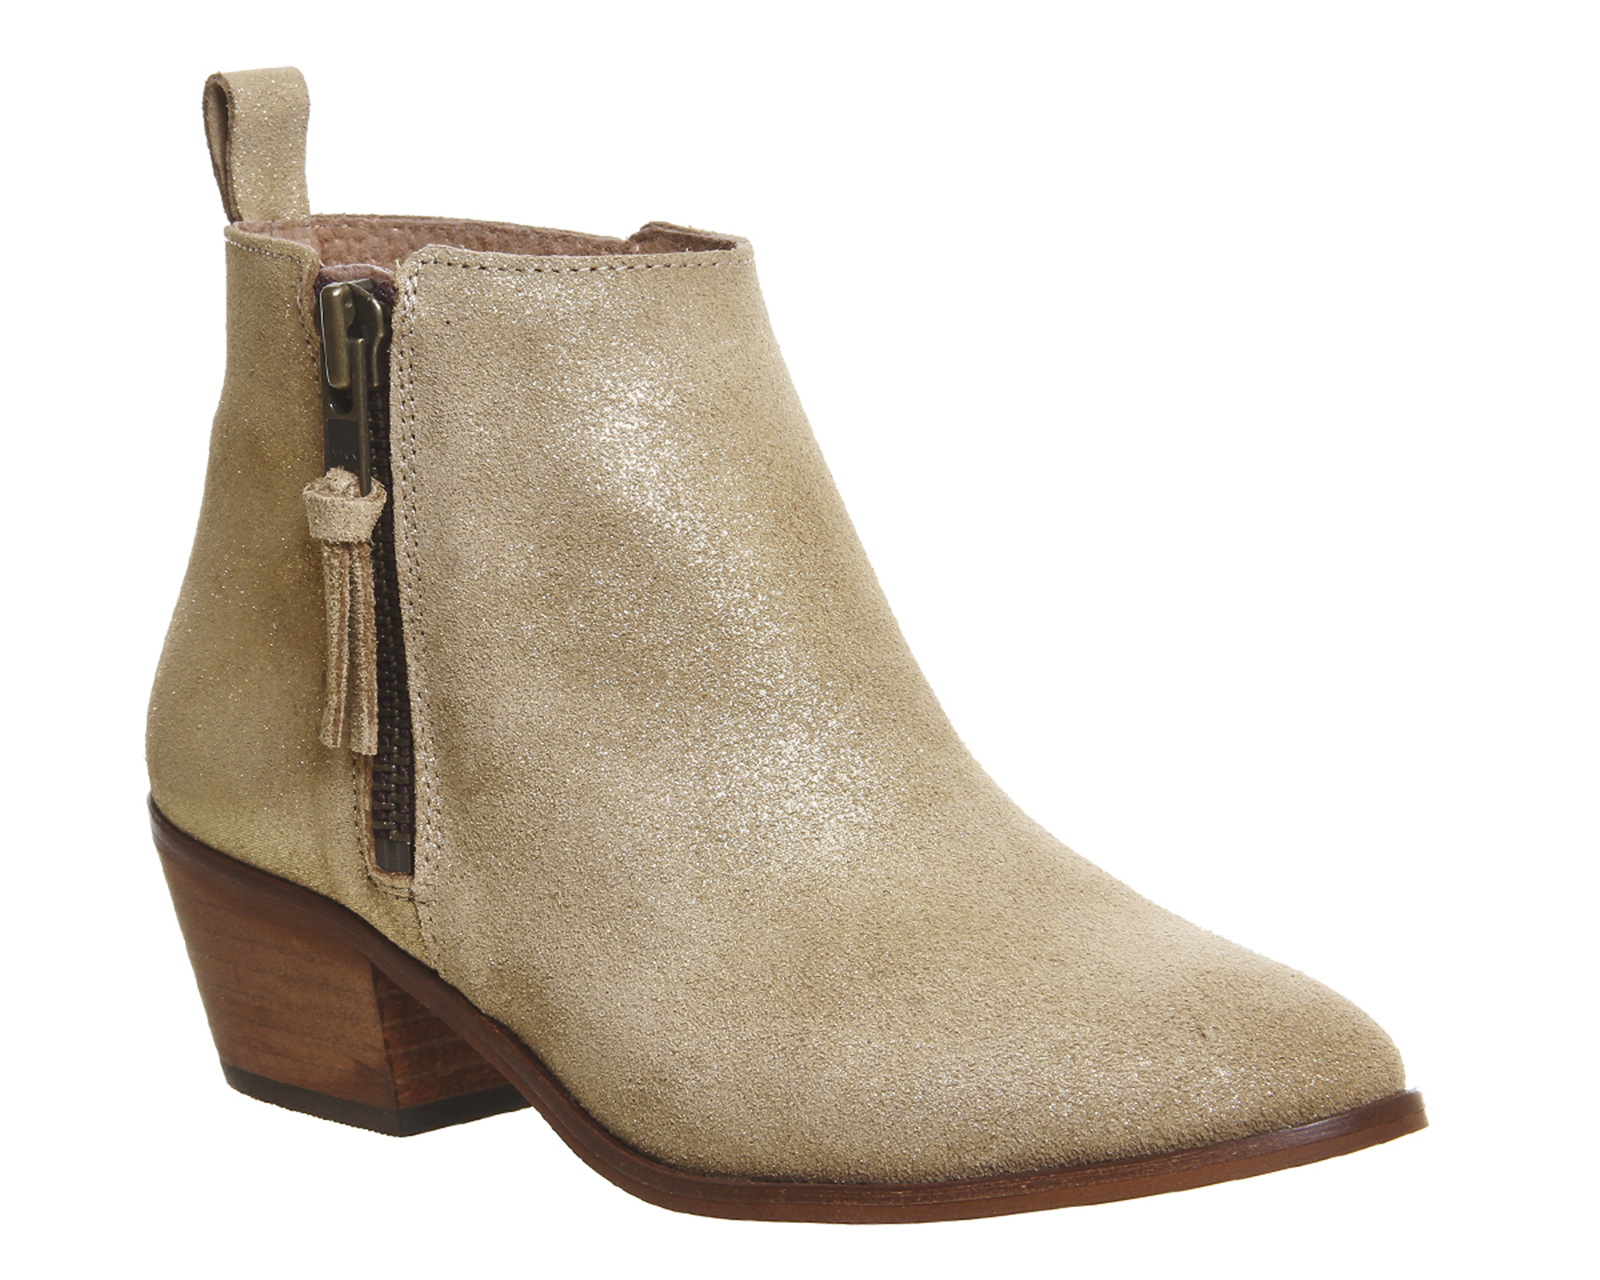 OFFICEImposter Side Zip Ankle BootsGold Metallic Suede